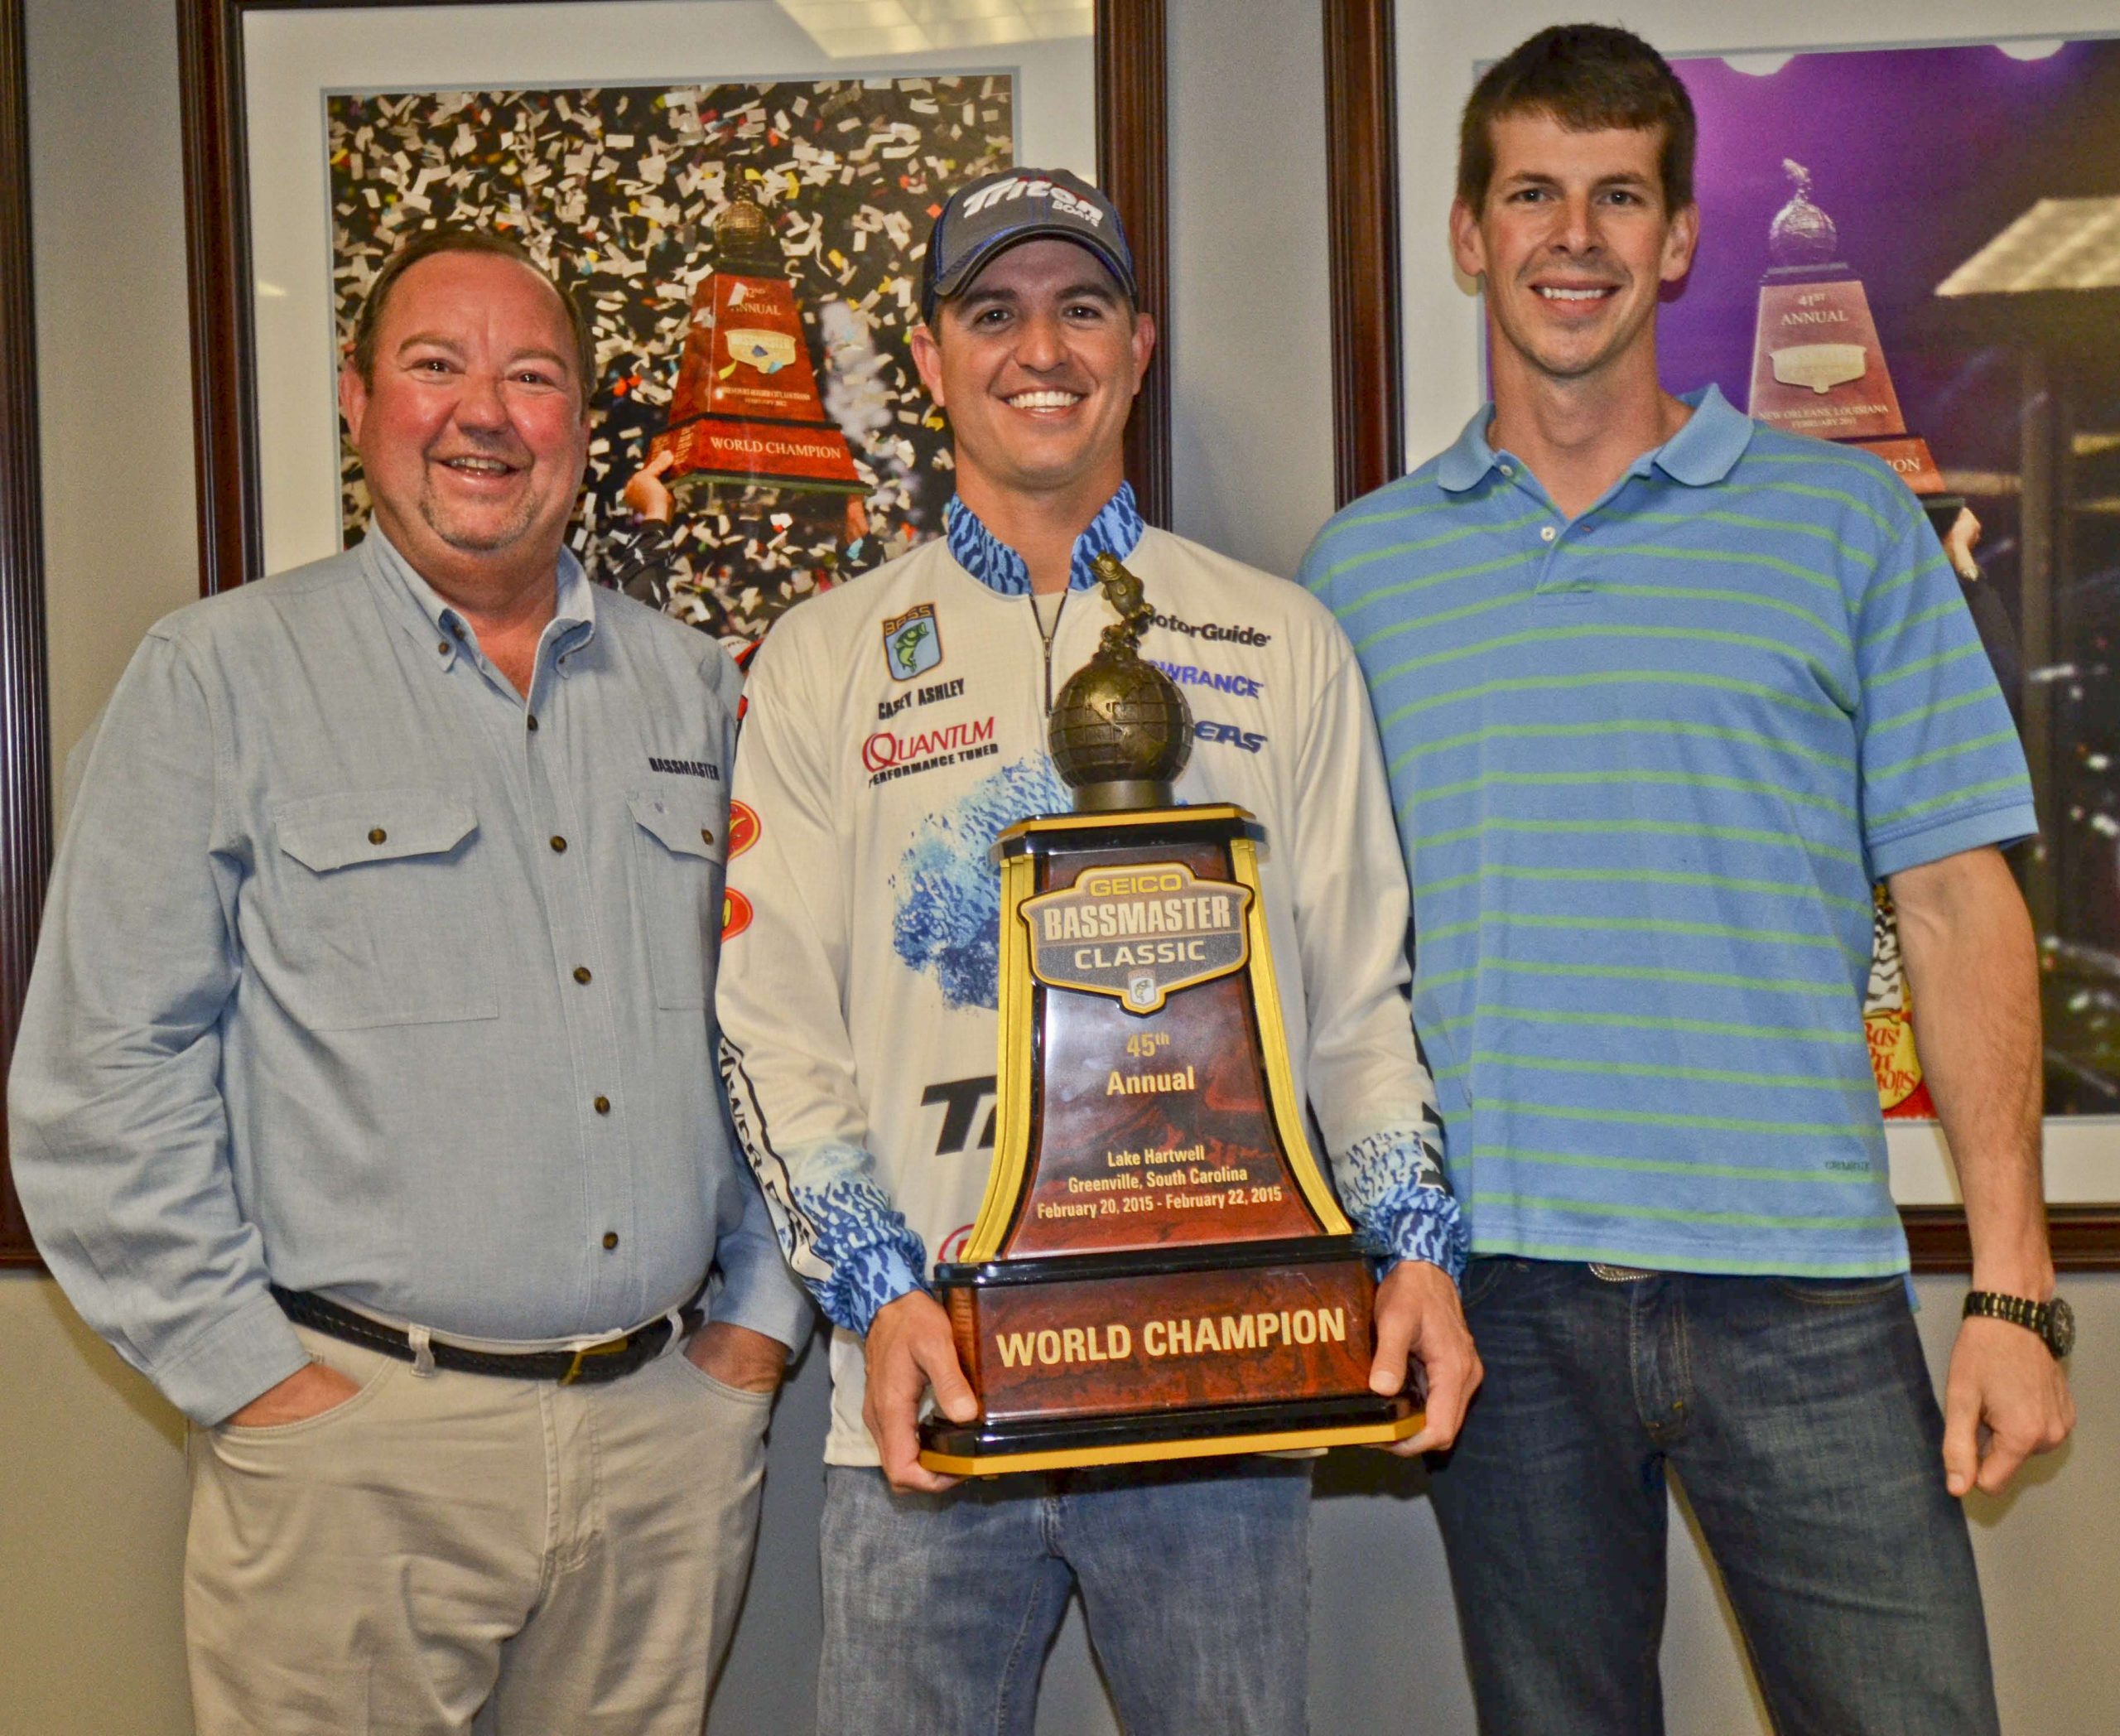 Ashley brought in his prized Classic trophy and posed for photos with CEO Bruce Akin and David Hunter Jones, managing editor of B.A.S.S. Times.